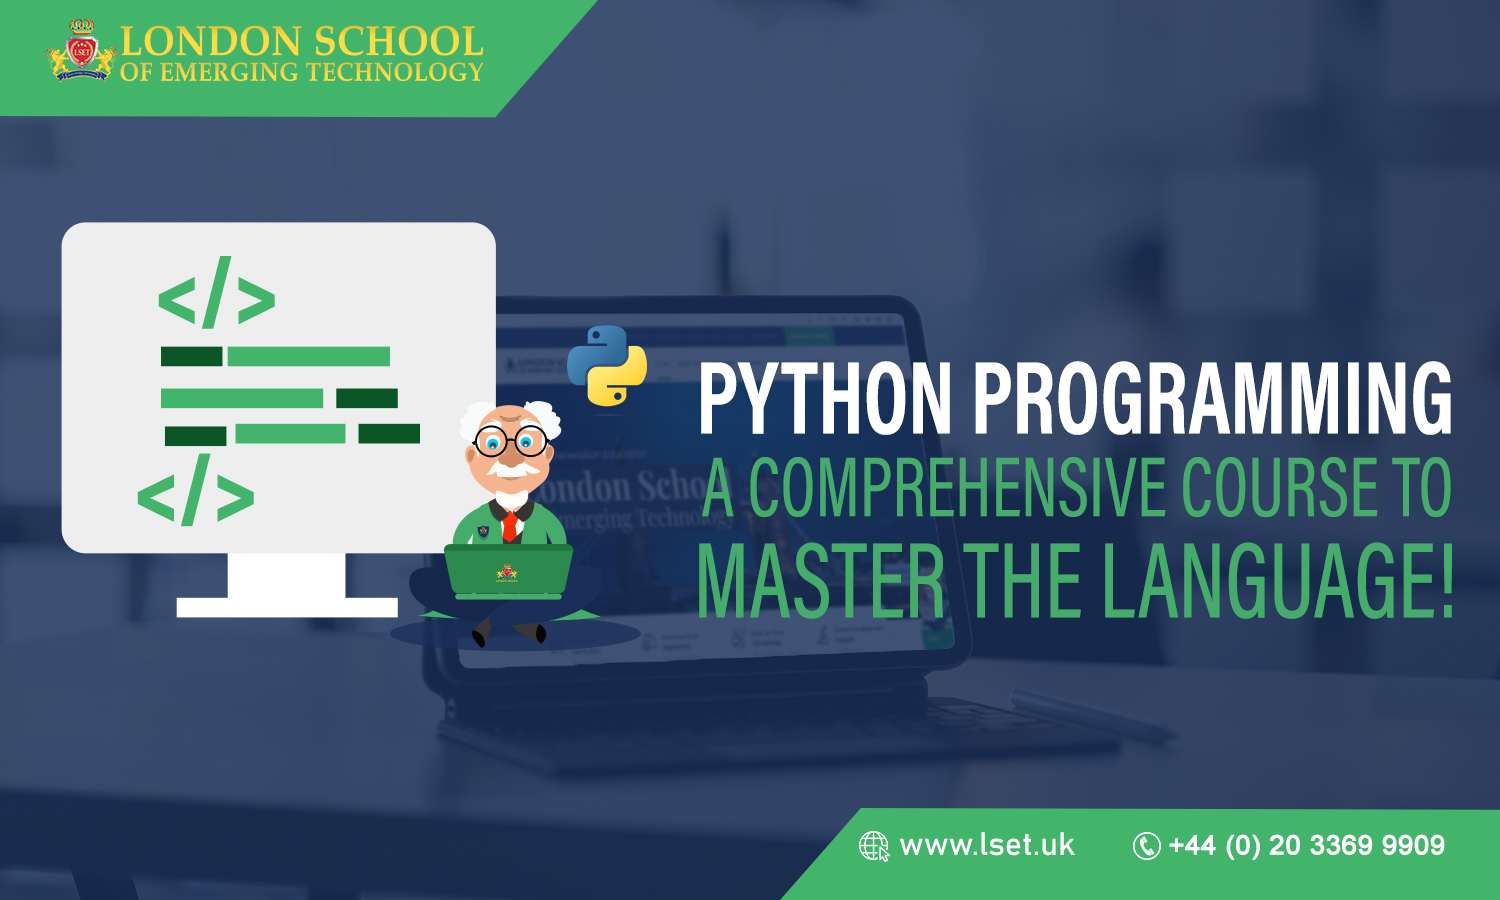 Python Programming A Comprehensive Course to Master the Language!